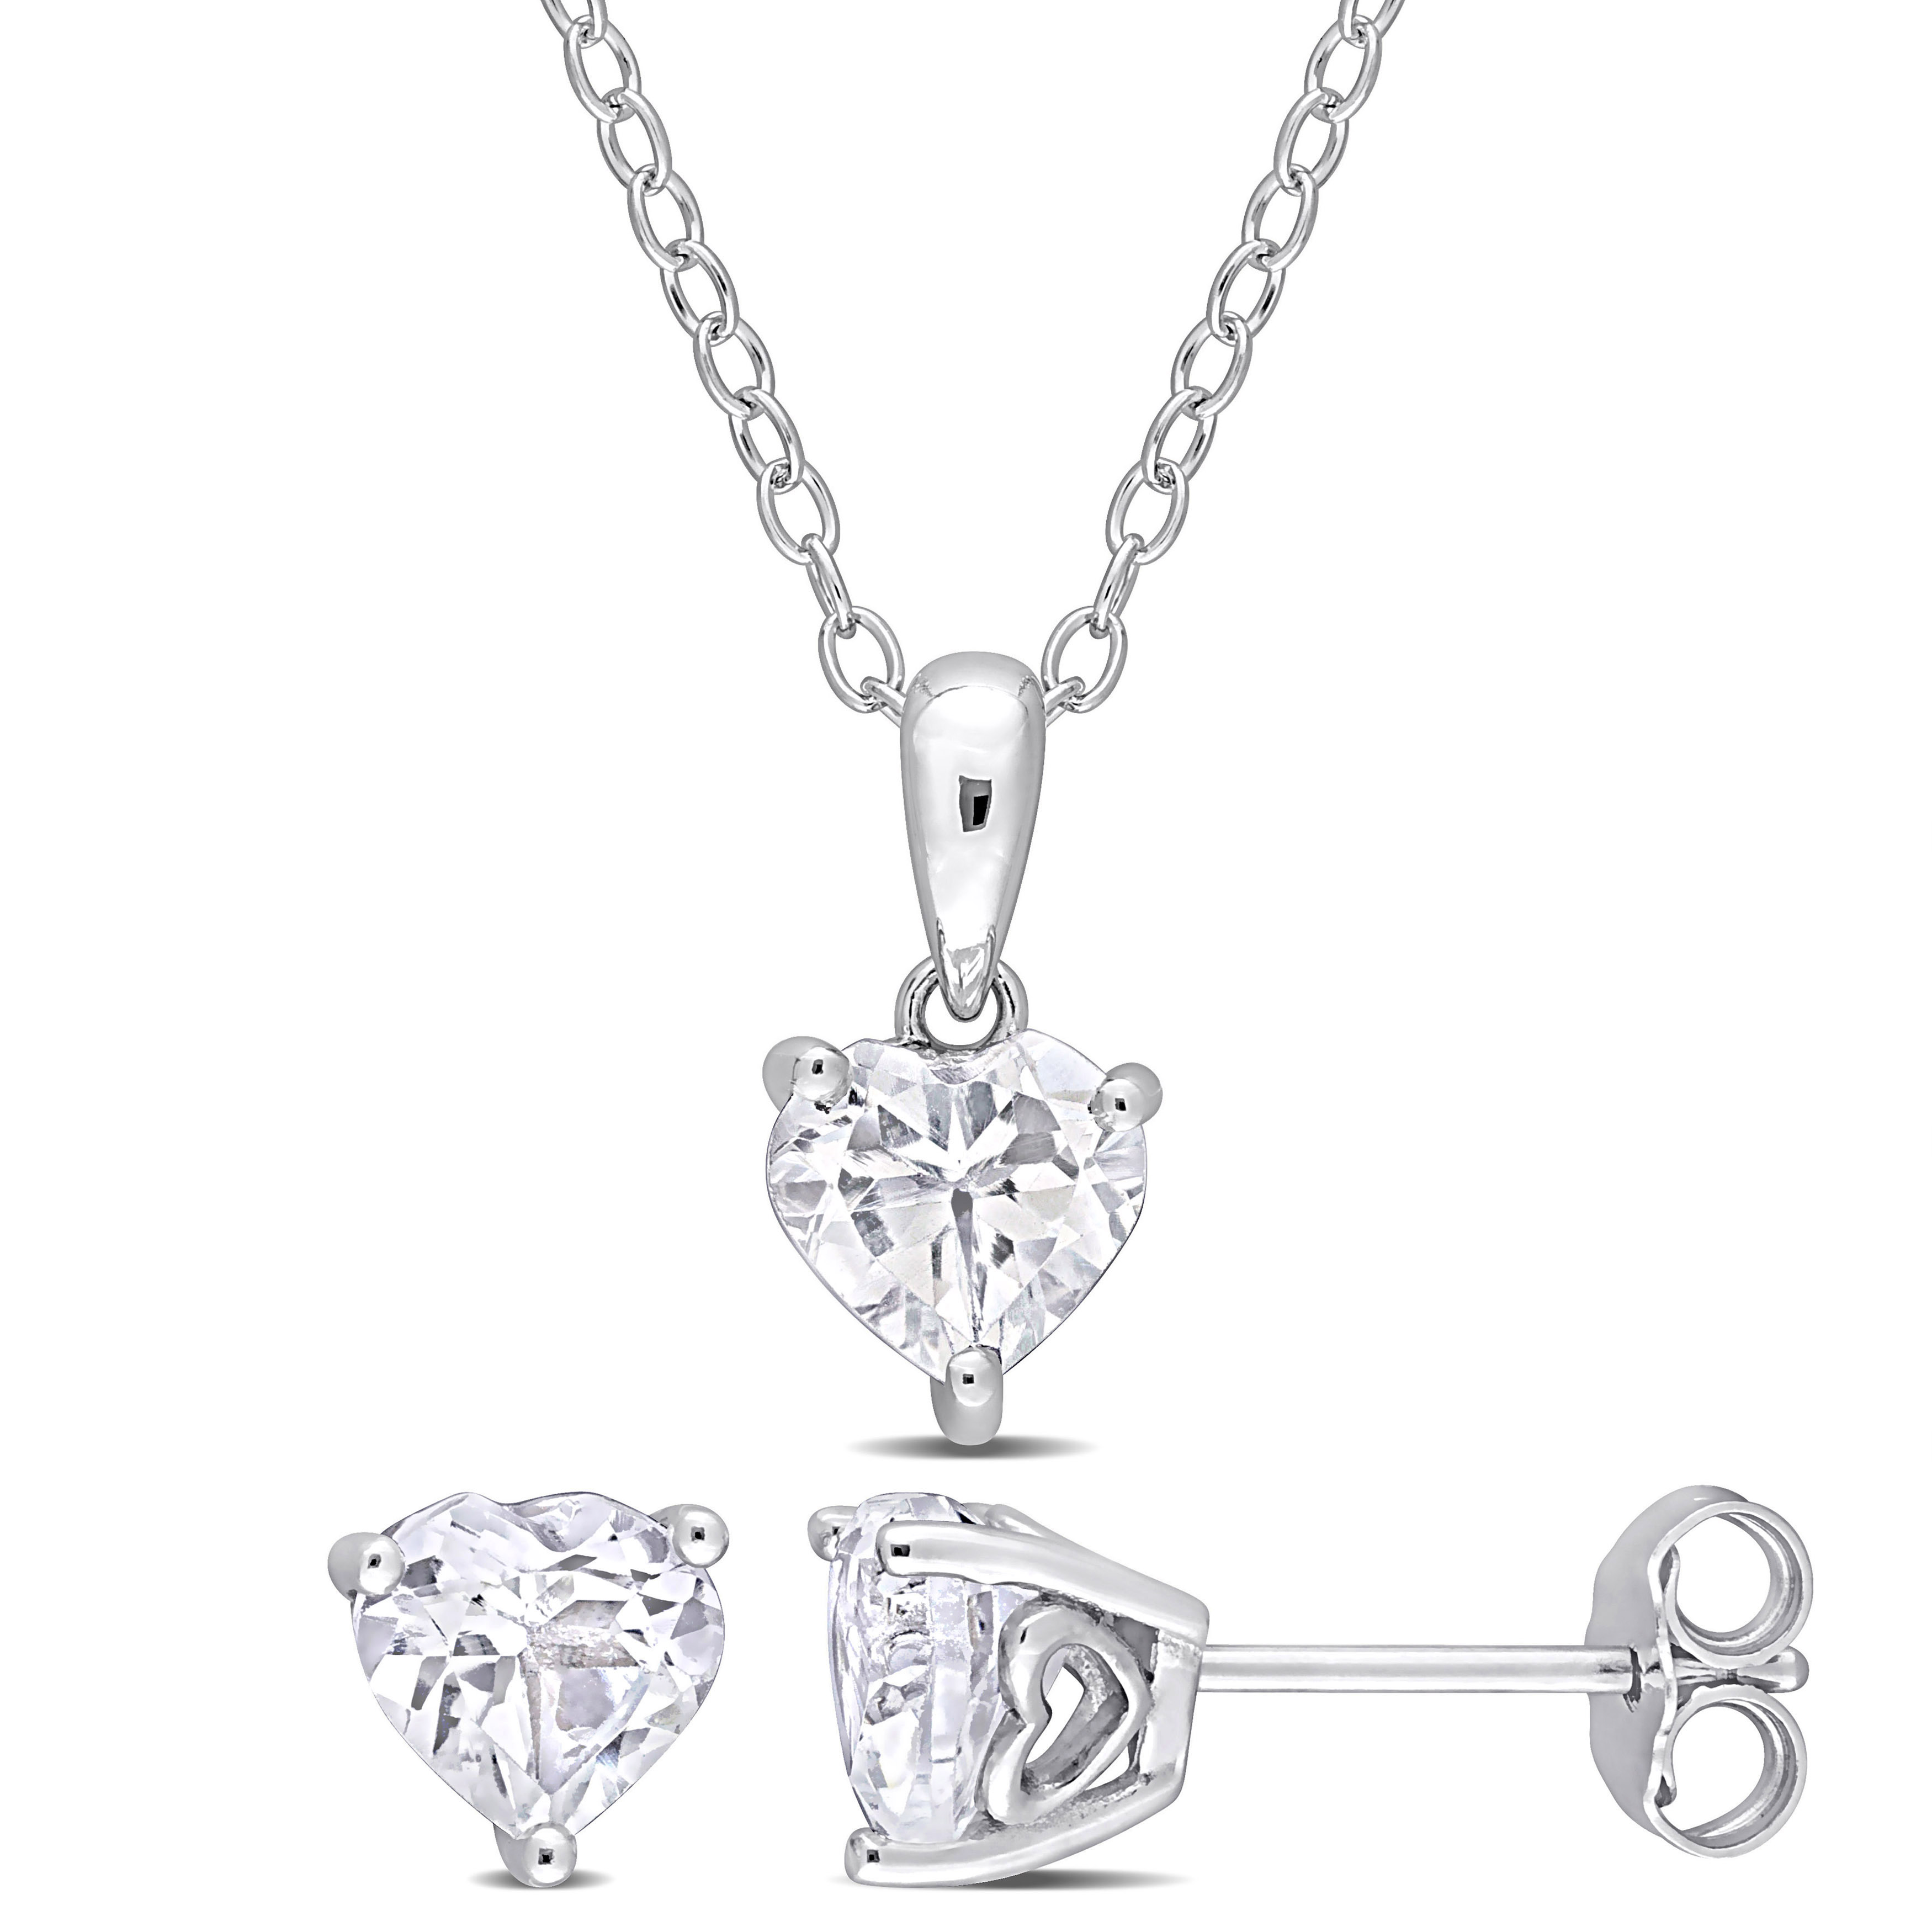 2 7/8 CT TGW Heart-Shape White Topaz 2-Piece Solitaire Pendant with Chain and Stud Earrings Set in Sterling Silver